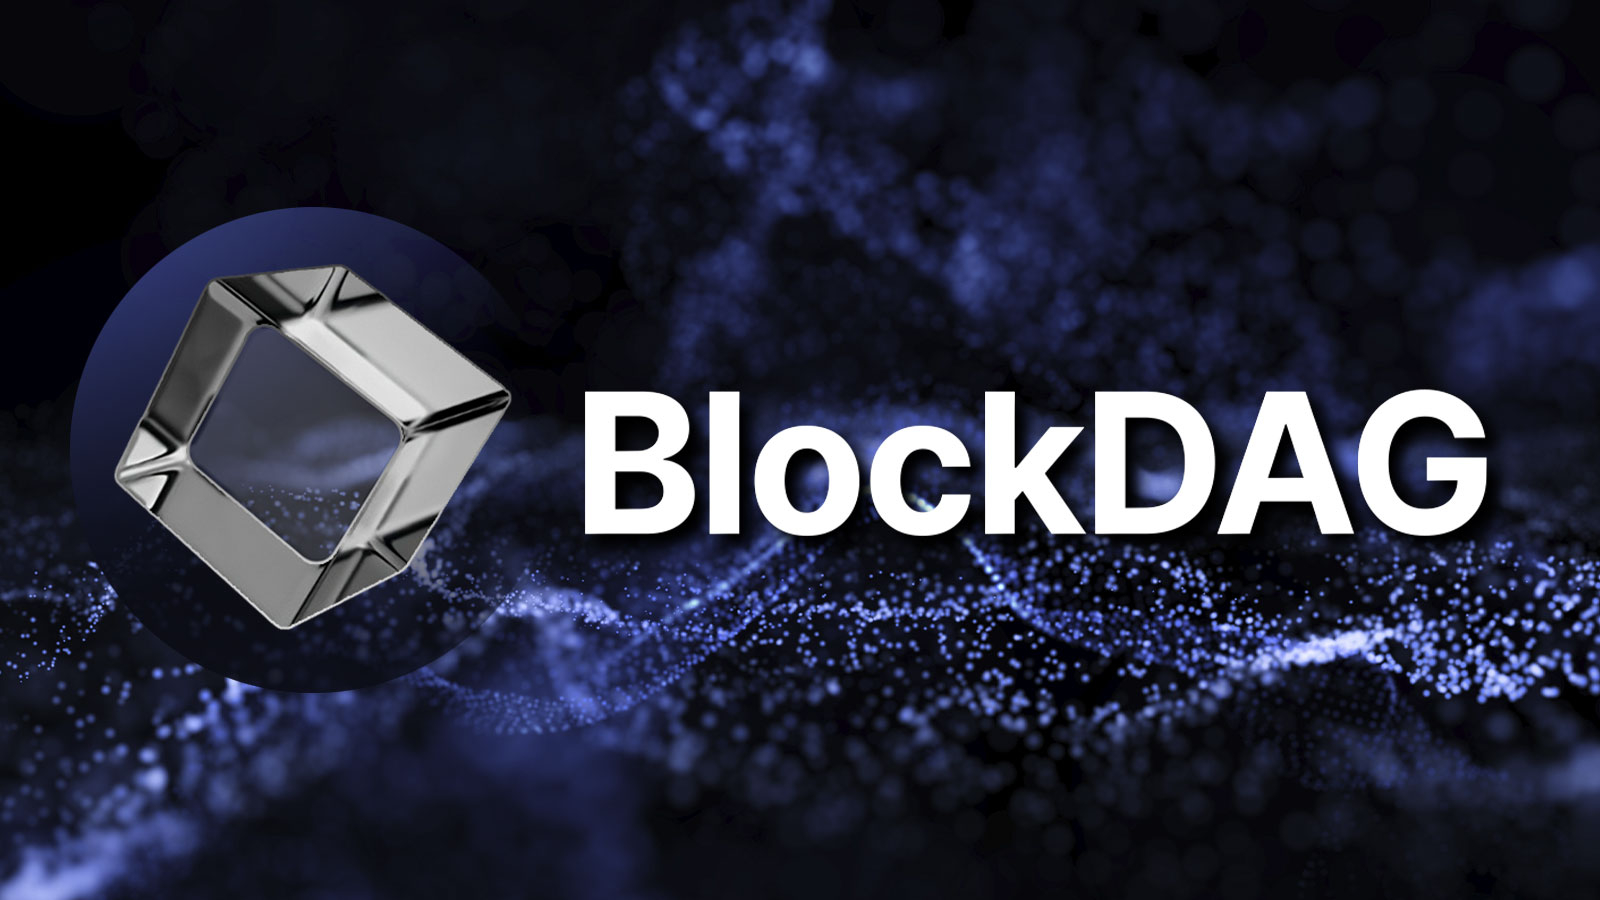 BlockDAG (BDAG) Preliminary Asset Sale Might be Spotlighted in April as Binance Coin (BNB), AIOZ (AIOZ) Value Keeps Surging